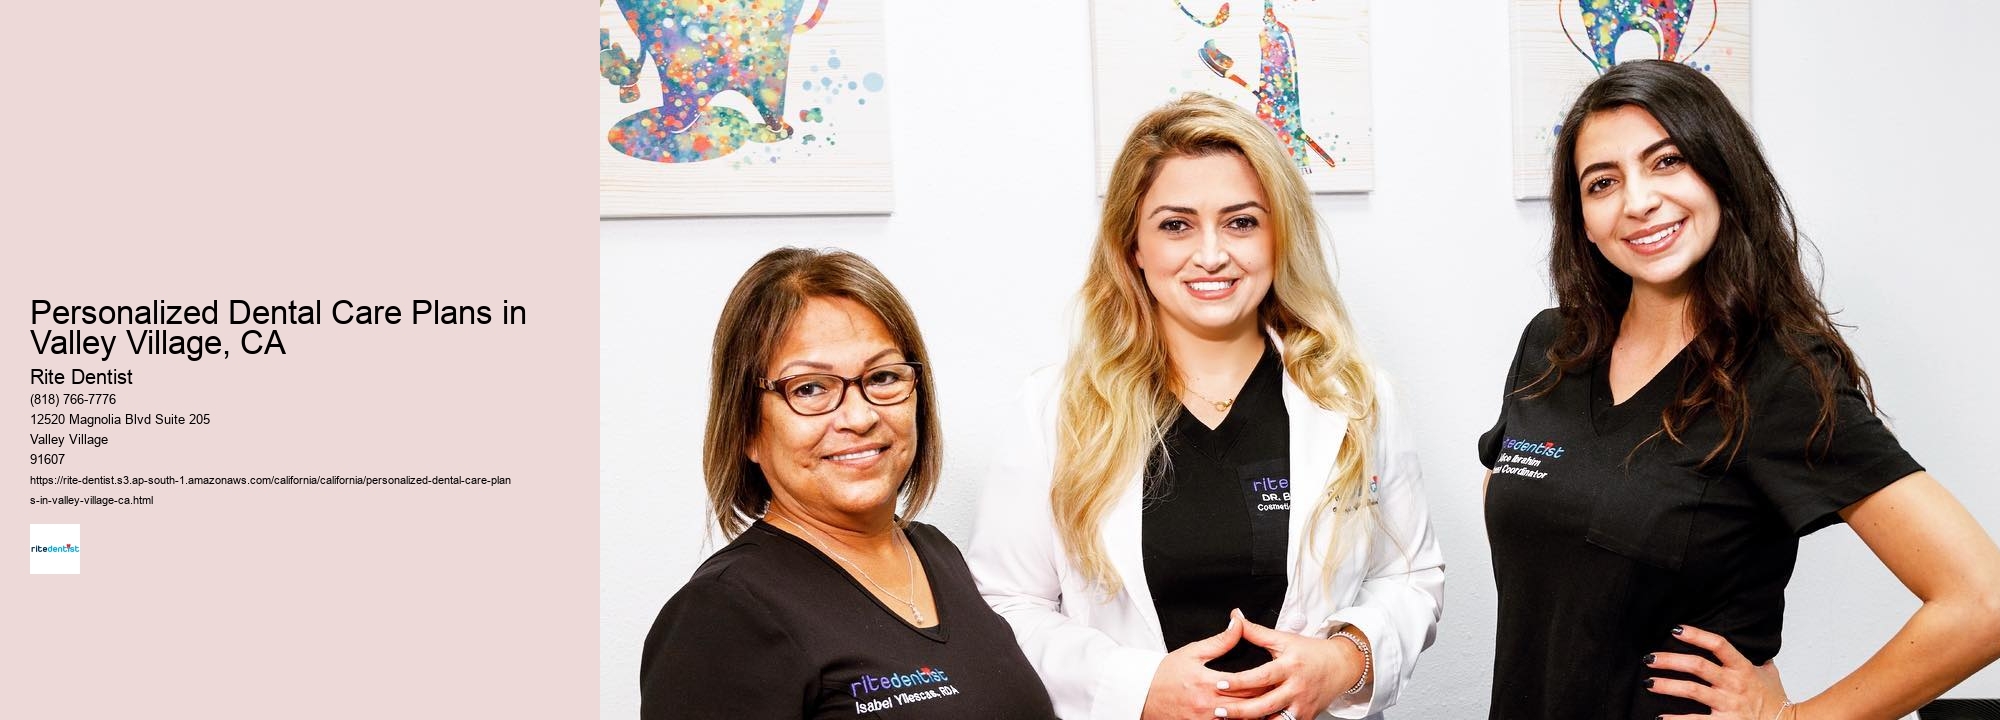 Personalized Dental Care Plans in Valley Village, CA